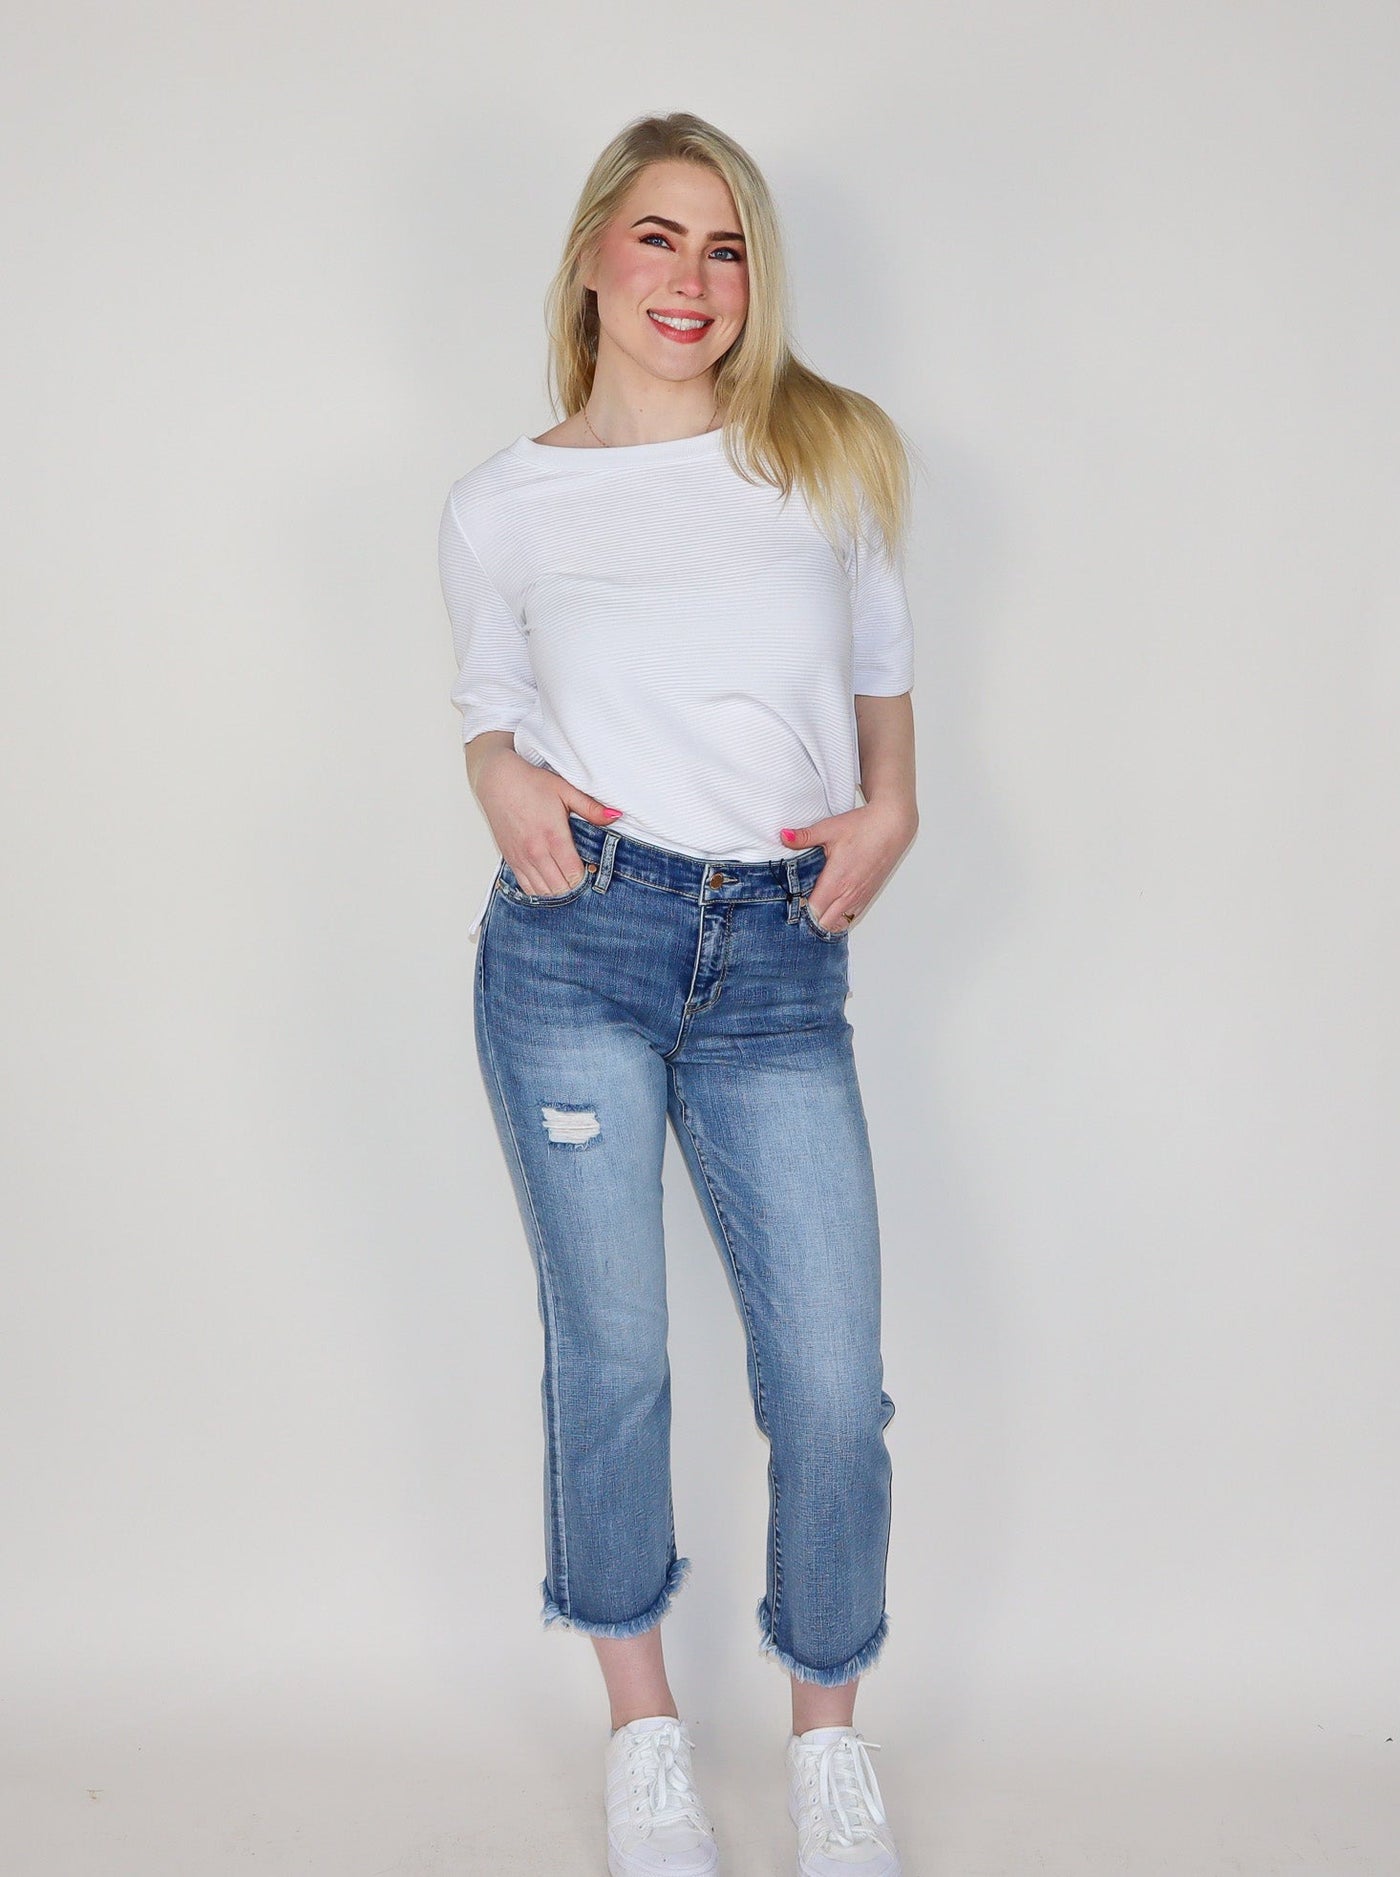 Model is wearing light washed distressed jeans. Jeans are paired with a white top and white sneakers. 